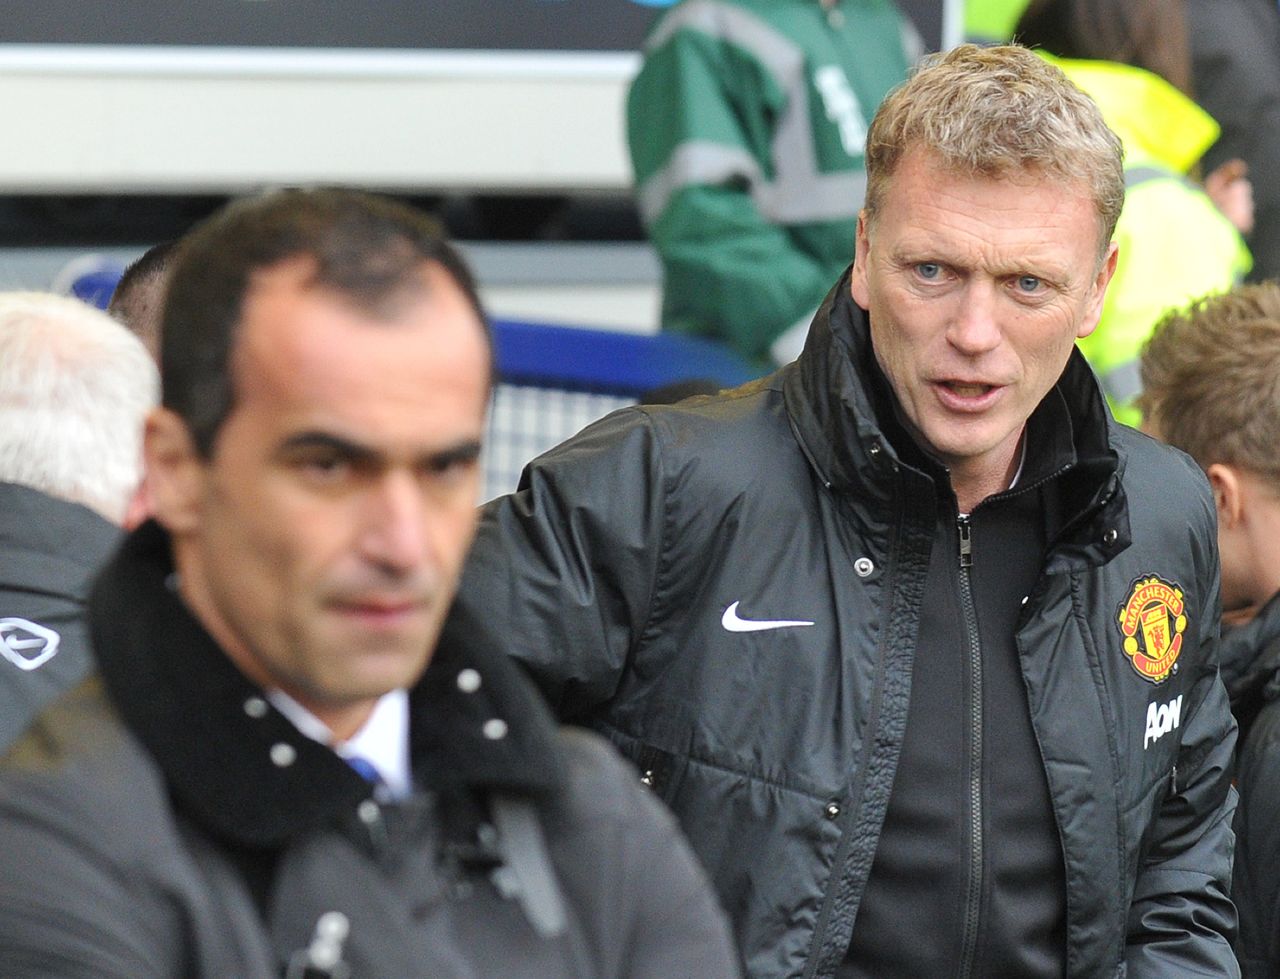 Everton replaced Moyes with Roberto Martinez (left). The Spaniard has not only produced results but an attractive style of football. Everton's 2-0 win at Goodison Park on Sunday sent United crashing to an 11th league loss this season under Moyes. It also ended United's hopes of qualifying for next season's European Champions League. 